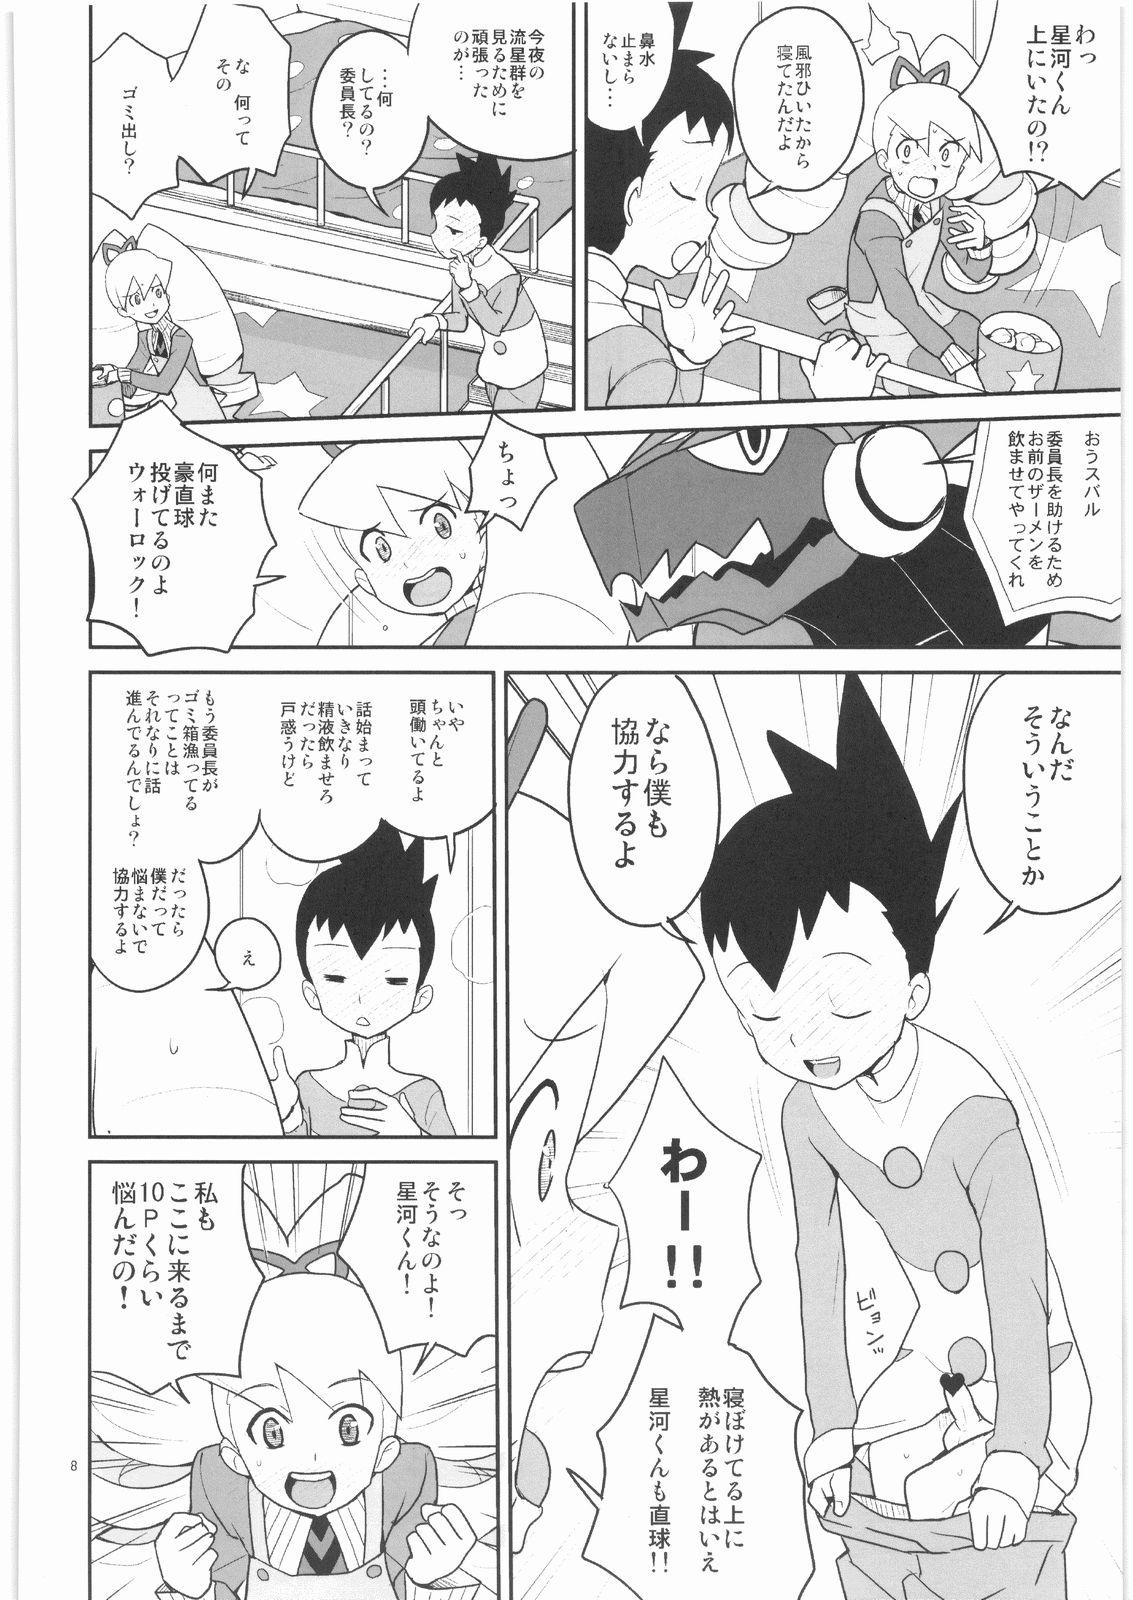 Little Drill to Tights to Iinchou! - Megaman Mega man star force Red - Page 7